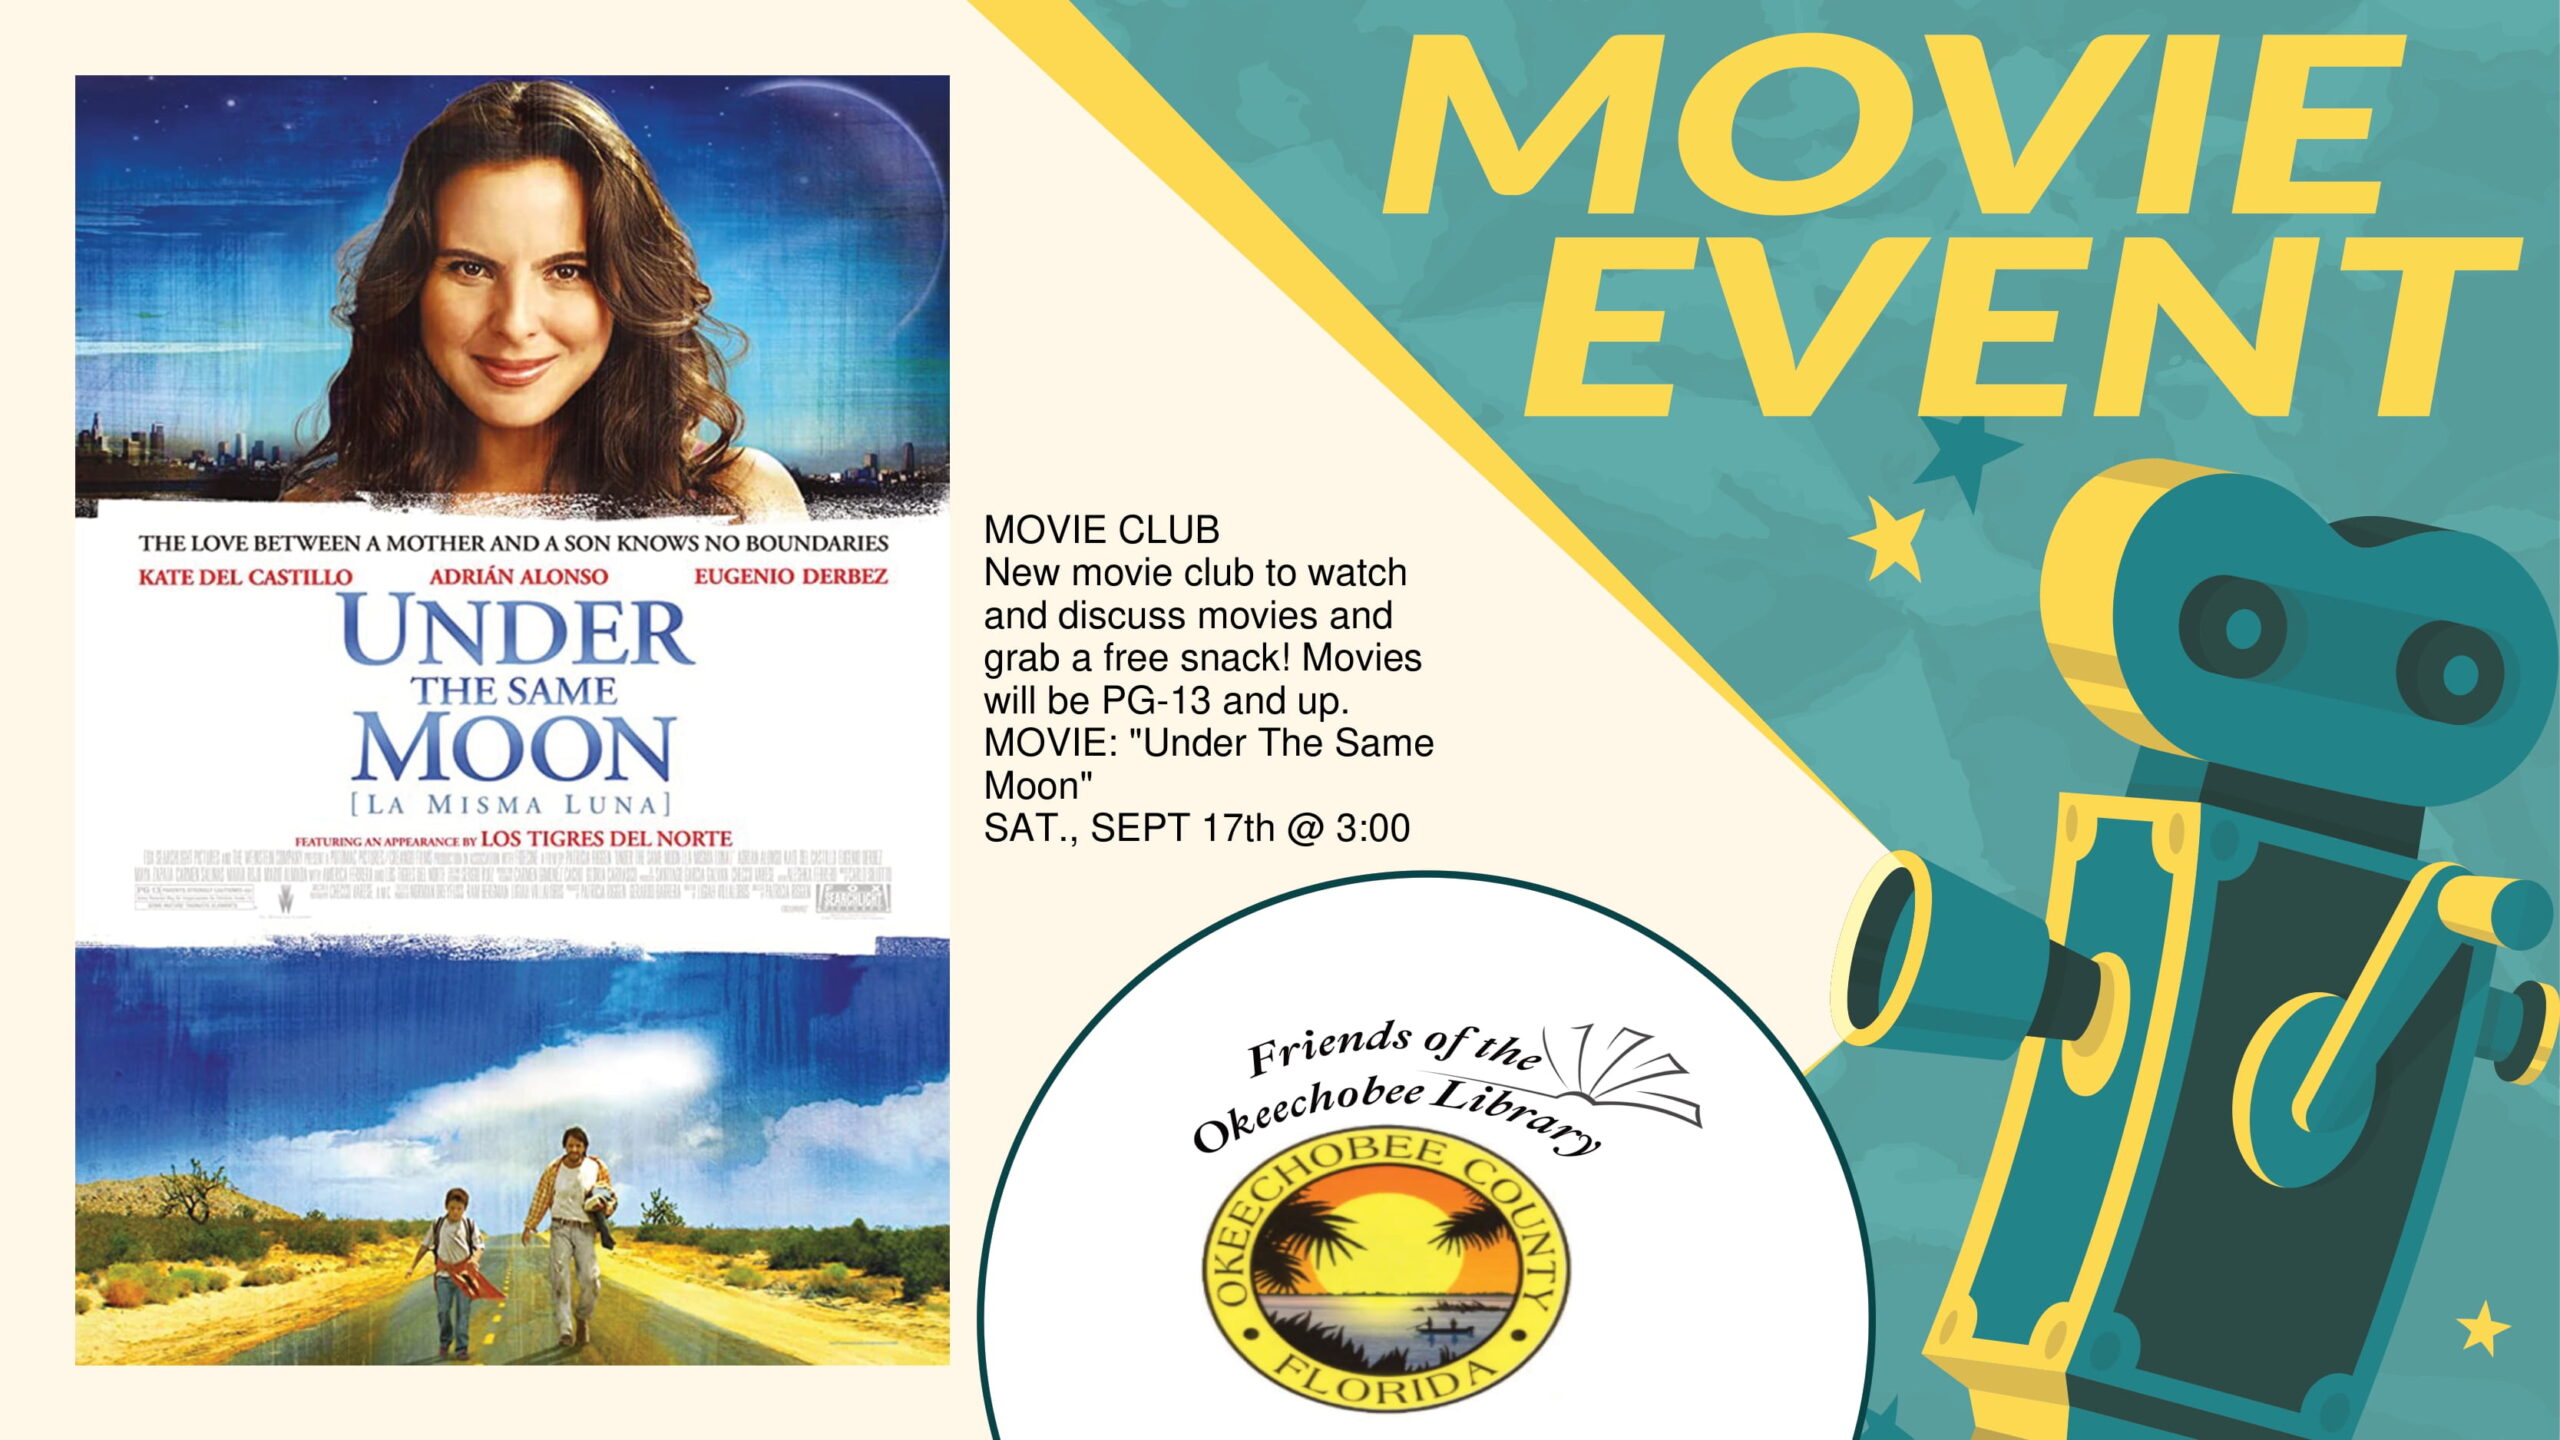 Enjoy a good movie and treats at the Library with our Movie Club on Saturday, September 17th at 3:00 p.m.! August's movie is "Under The Same Moon" Snacks will be provided. Appropriate for teens and up. Spanish language movie, subtitled in English